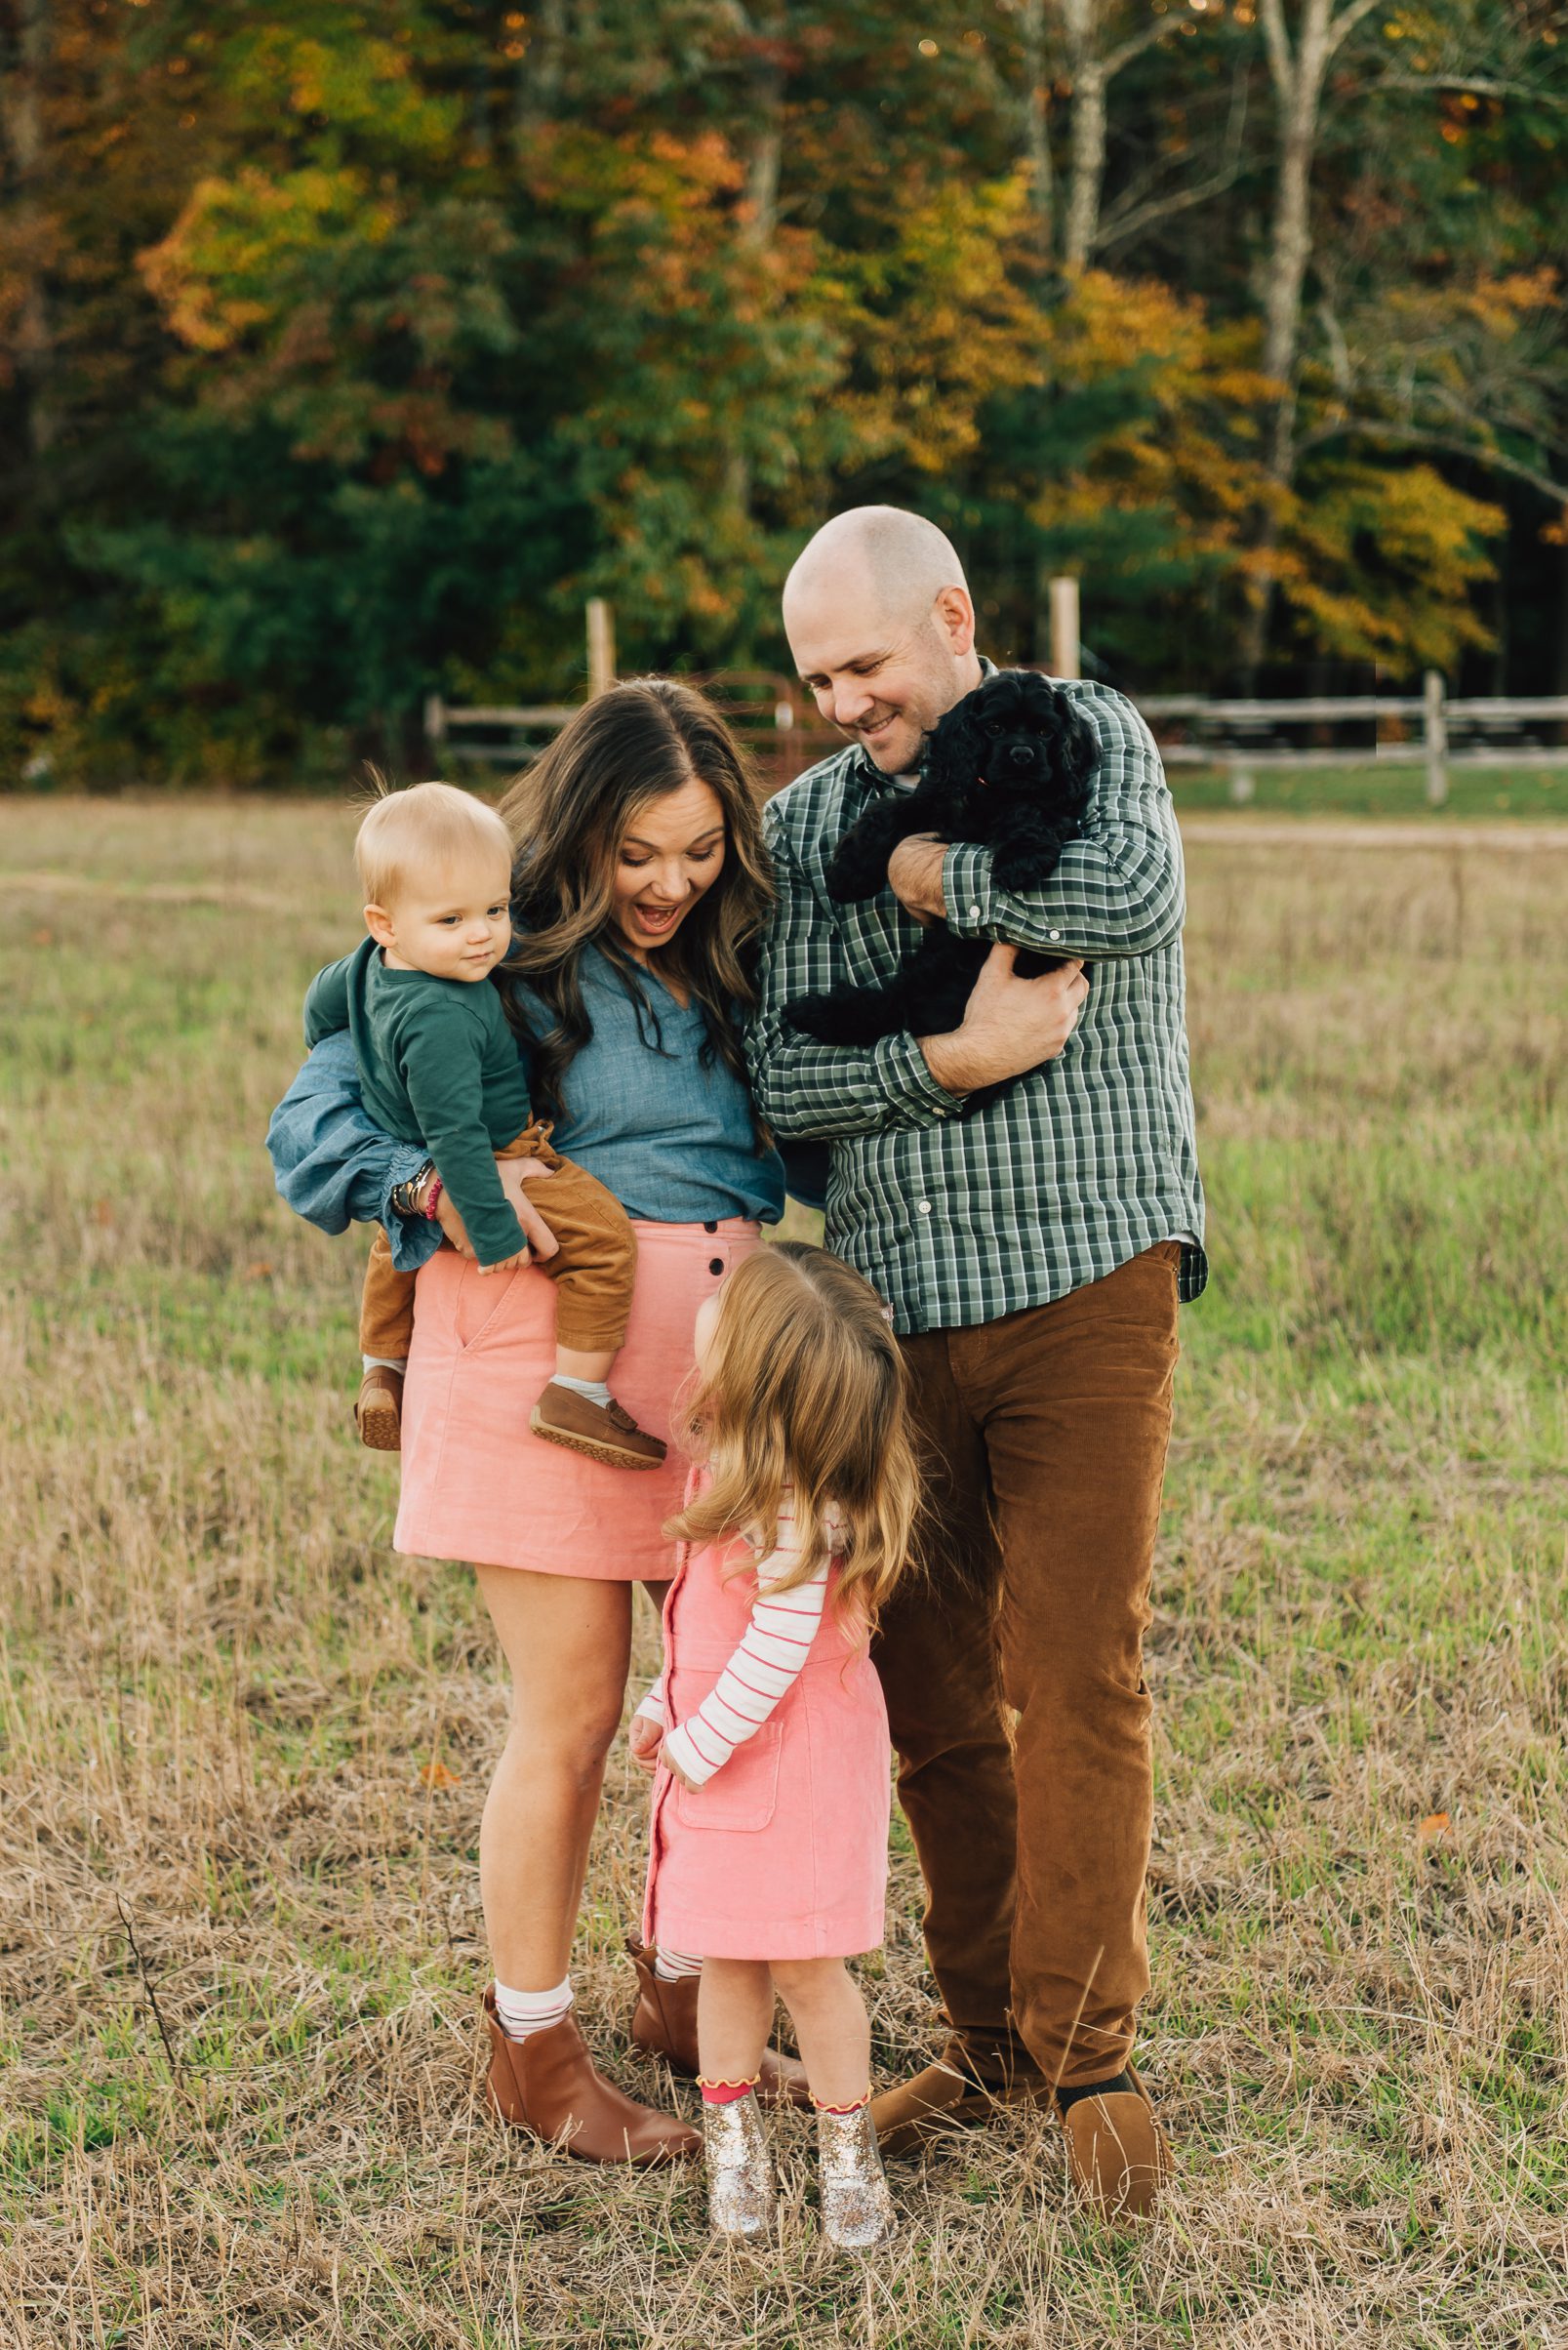 Simsbury Fall Family Photo Shoot in Connecticut | Sharon Leger Photography | CT Newborn and Family Photography